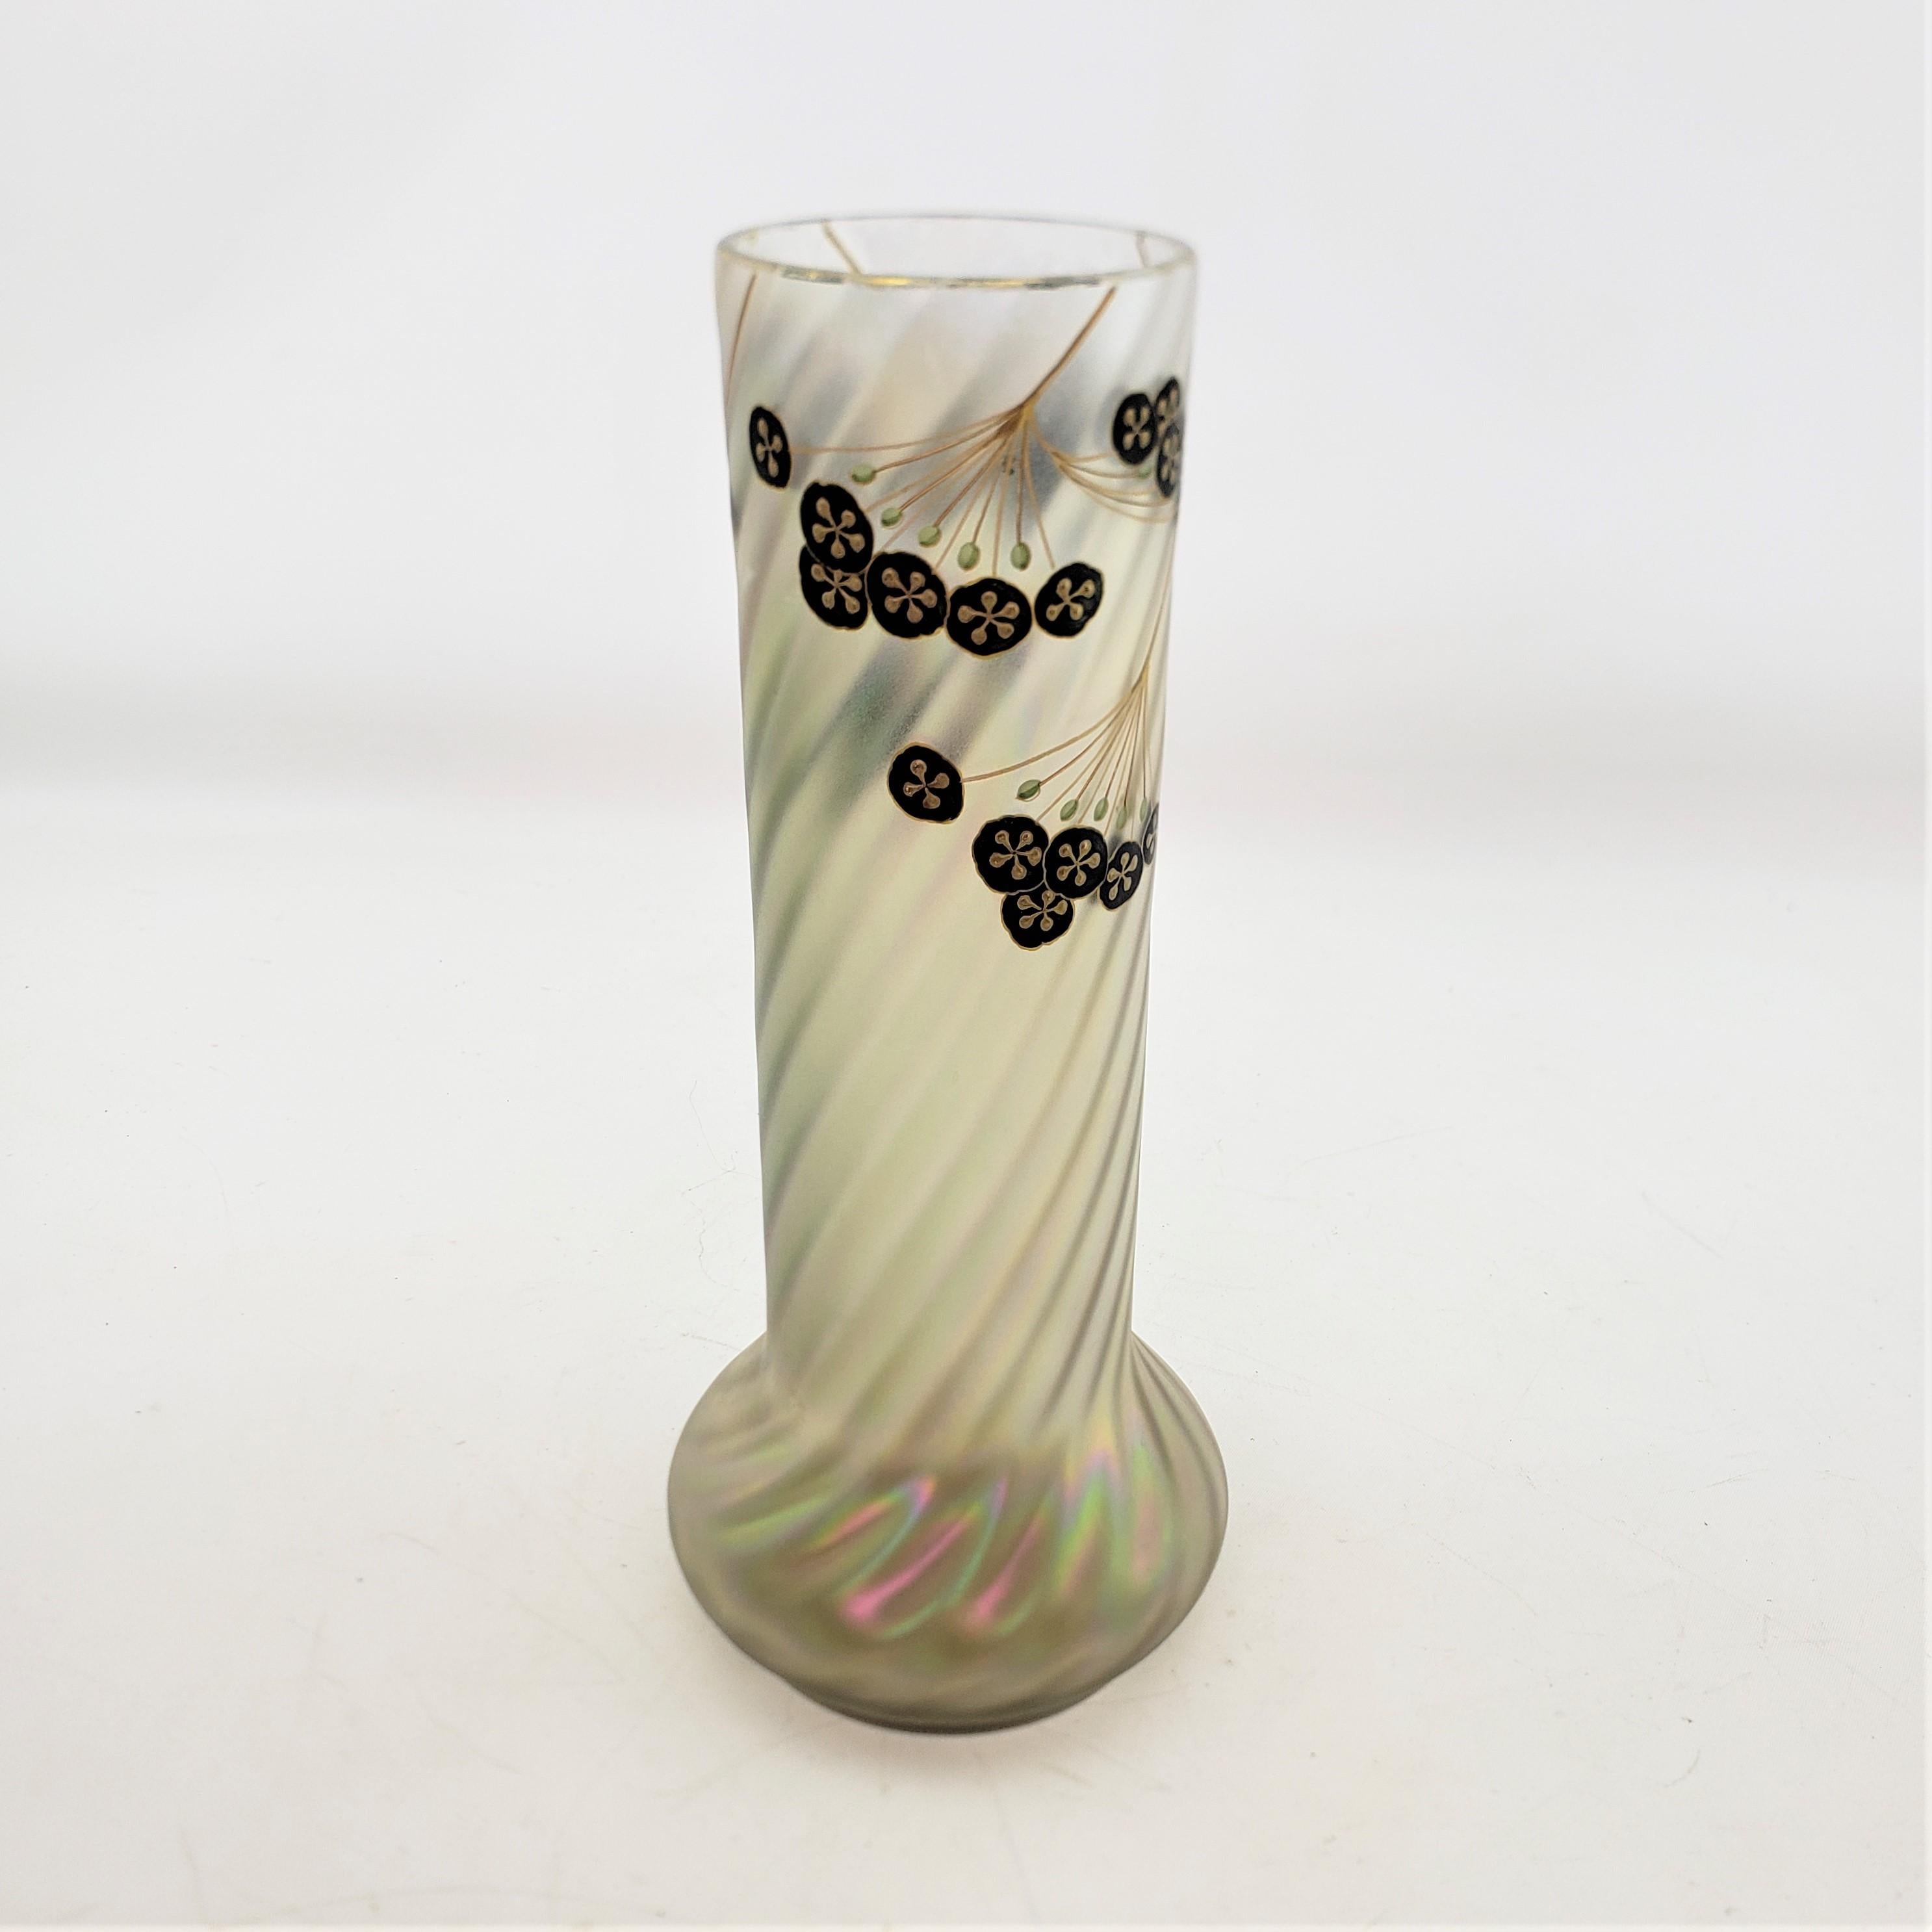 Antique Art Nouveau Iridescent Art Glass Vase with Enamel Floral Decoration In Good Condition For Sale In Hamilton, Ontario